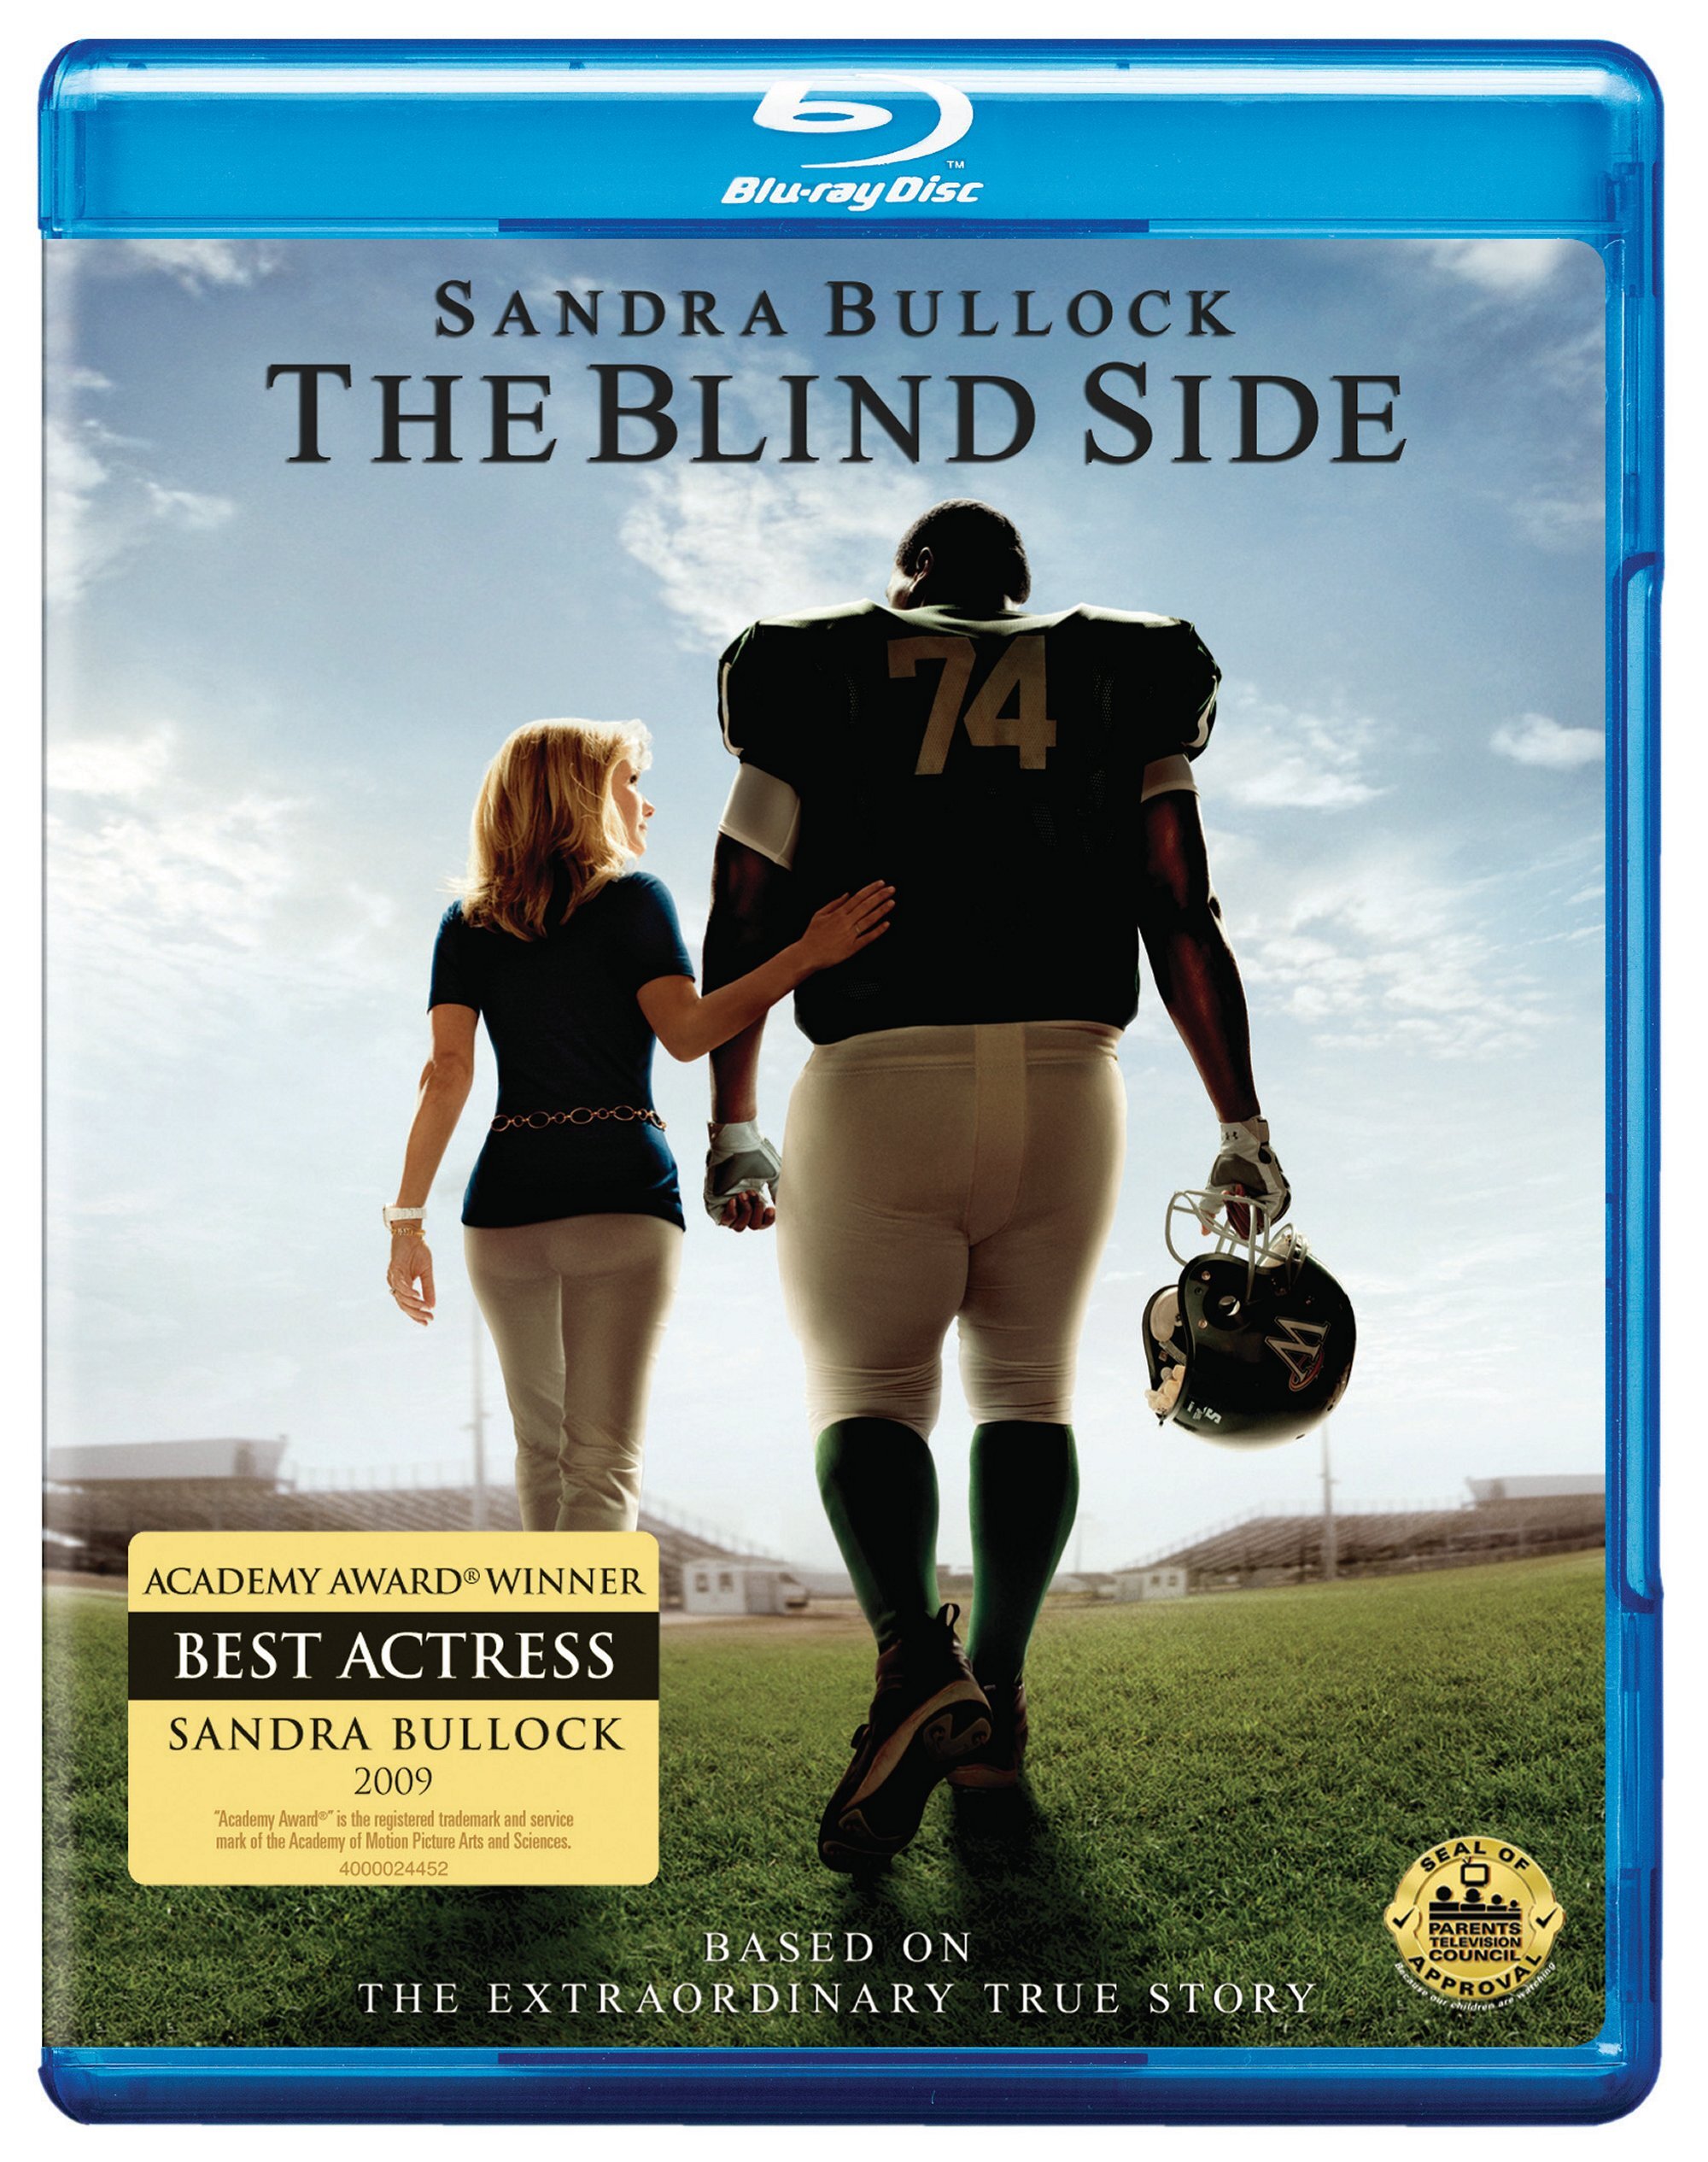 The Blind Side - Blu-ray [ 2009 ]  - Drama Movies On Blu-ray - Movies On GRUV